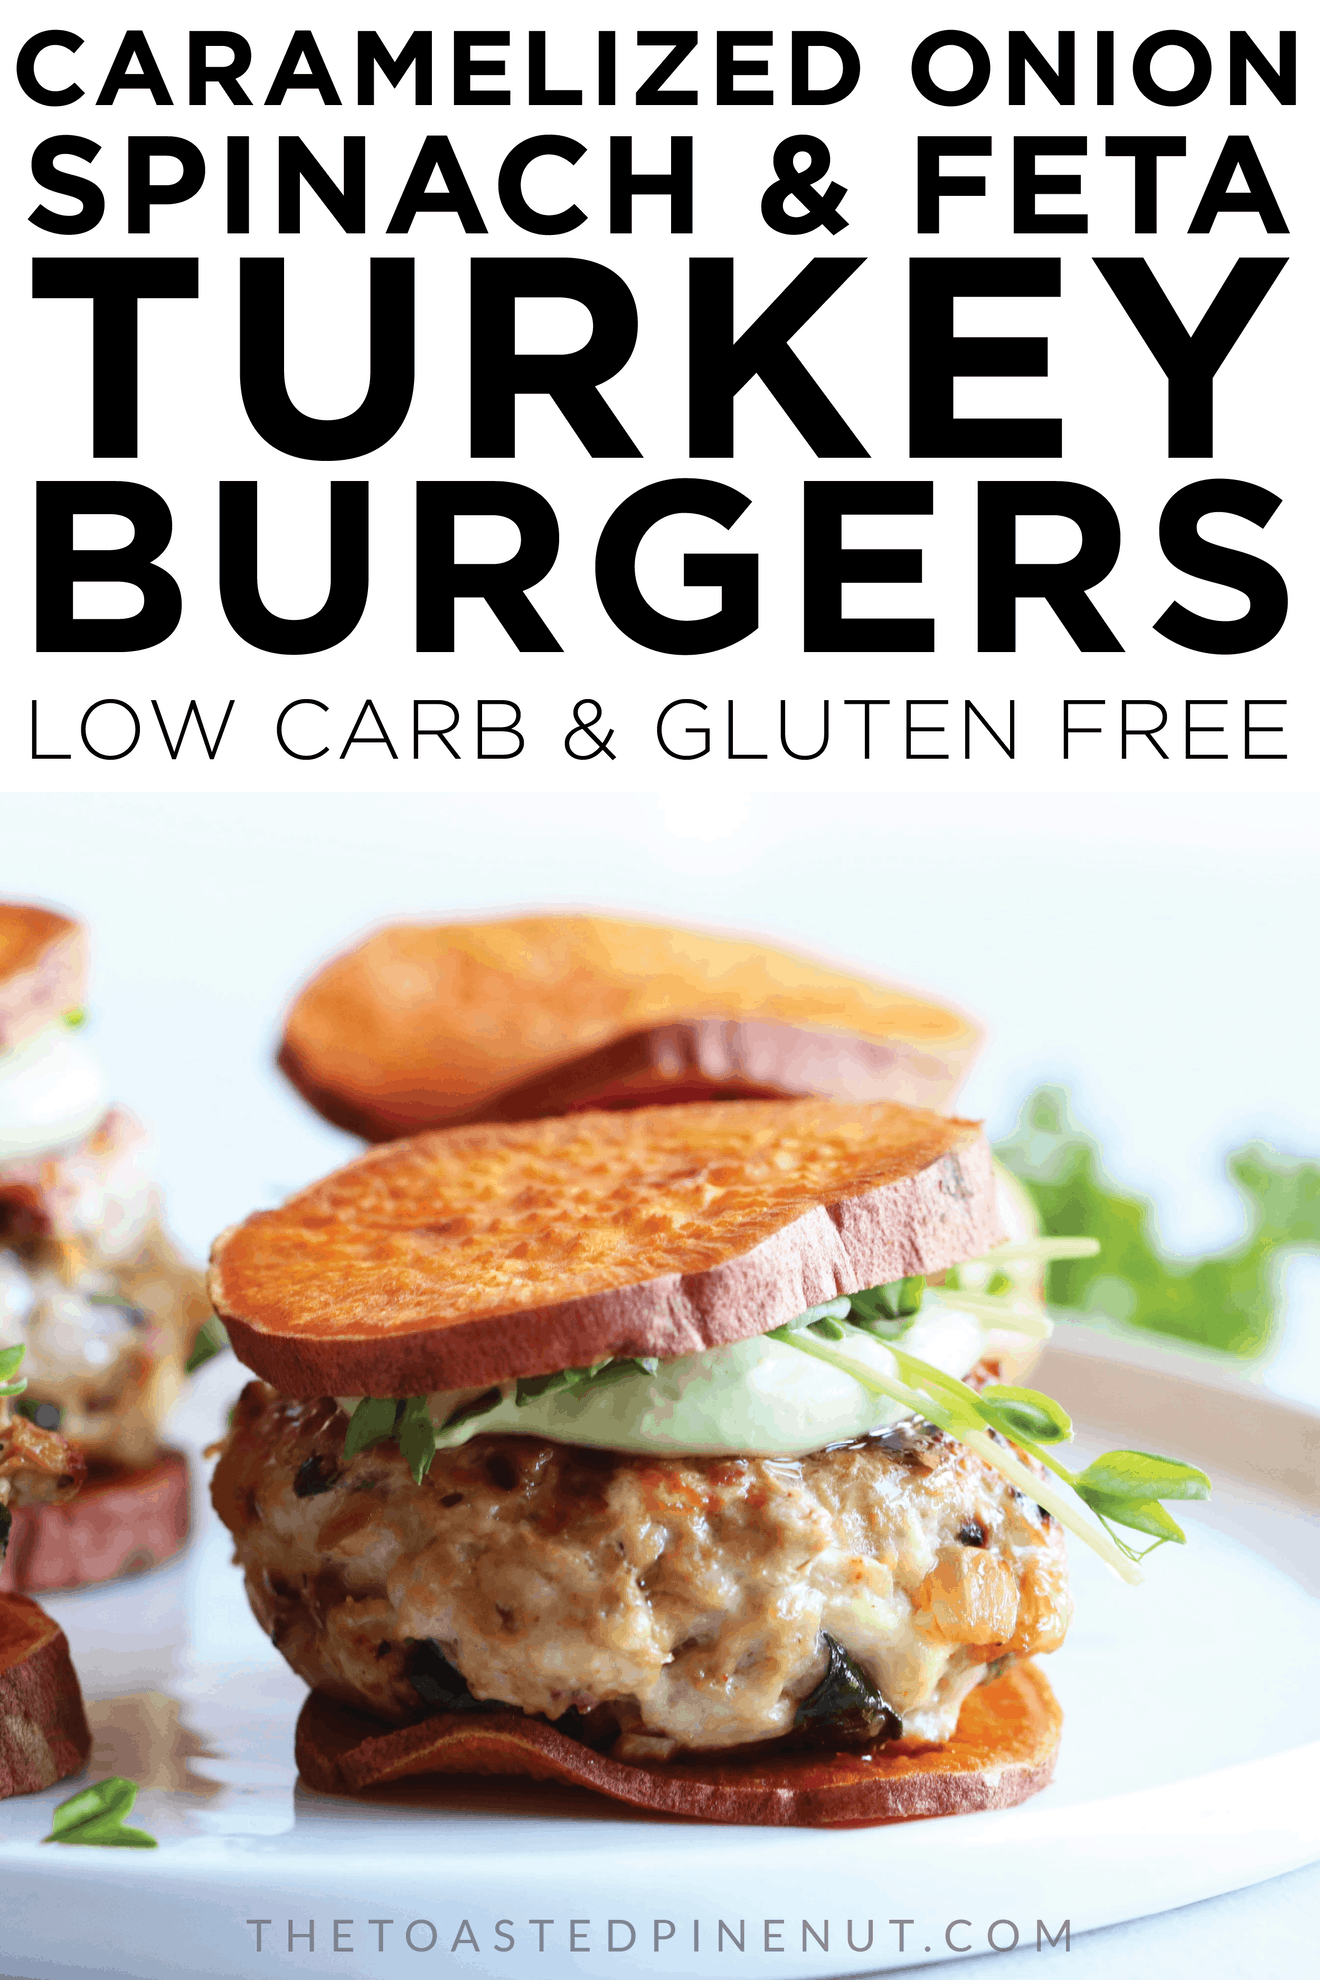 Love these Caramelized Onion Spinach + Feta Turkey Burgers with sweet potato buns for a delicious weeknight meal! Such a tasty gluten free dinner! thetoastedpinenut.com #glutenfree #lowcarb #primal #sweetpotato #bun #whole30friendly #paleofriendly #weeknightmeal #dinner #mealprep